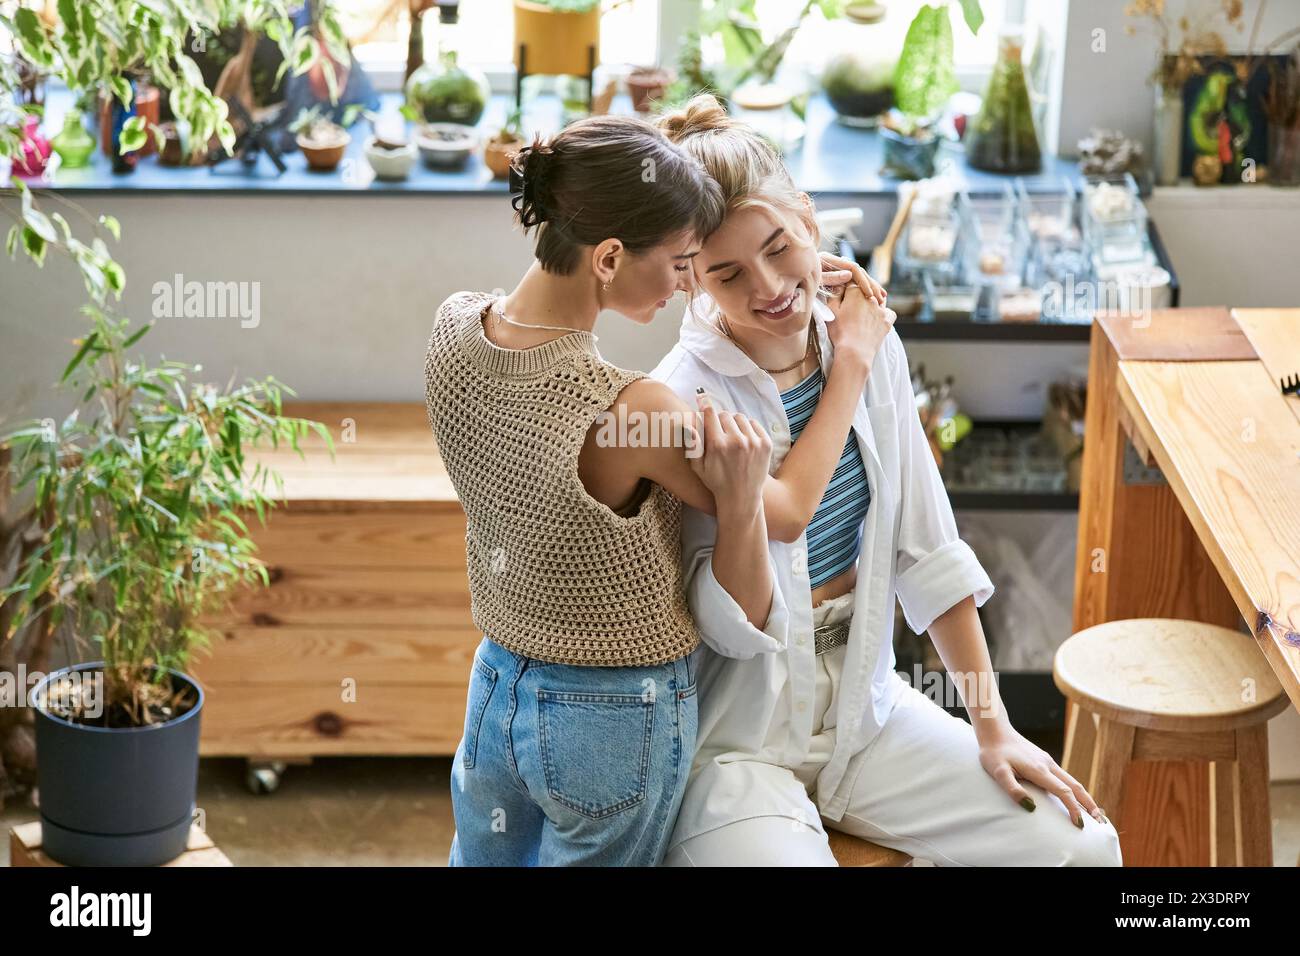 Loving lesbian couple sitting closely, sharing creative moment in art studio. Stock Photo